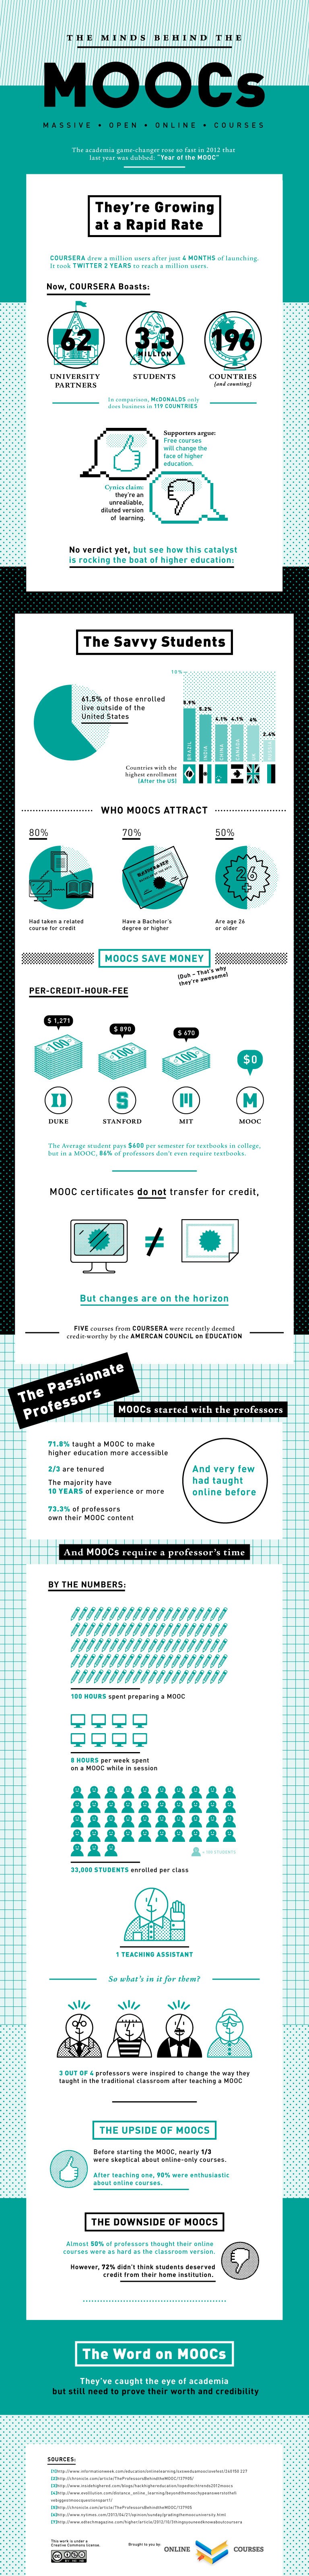 The Minds Behind The MOOCs Infographic